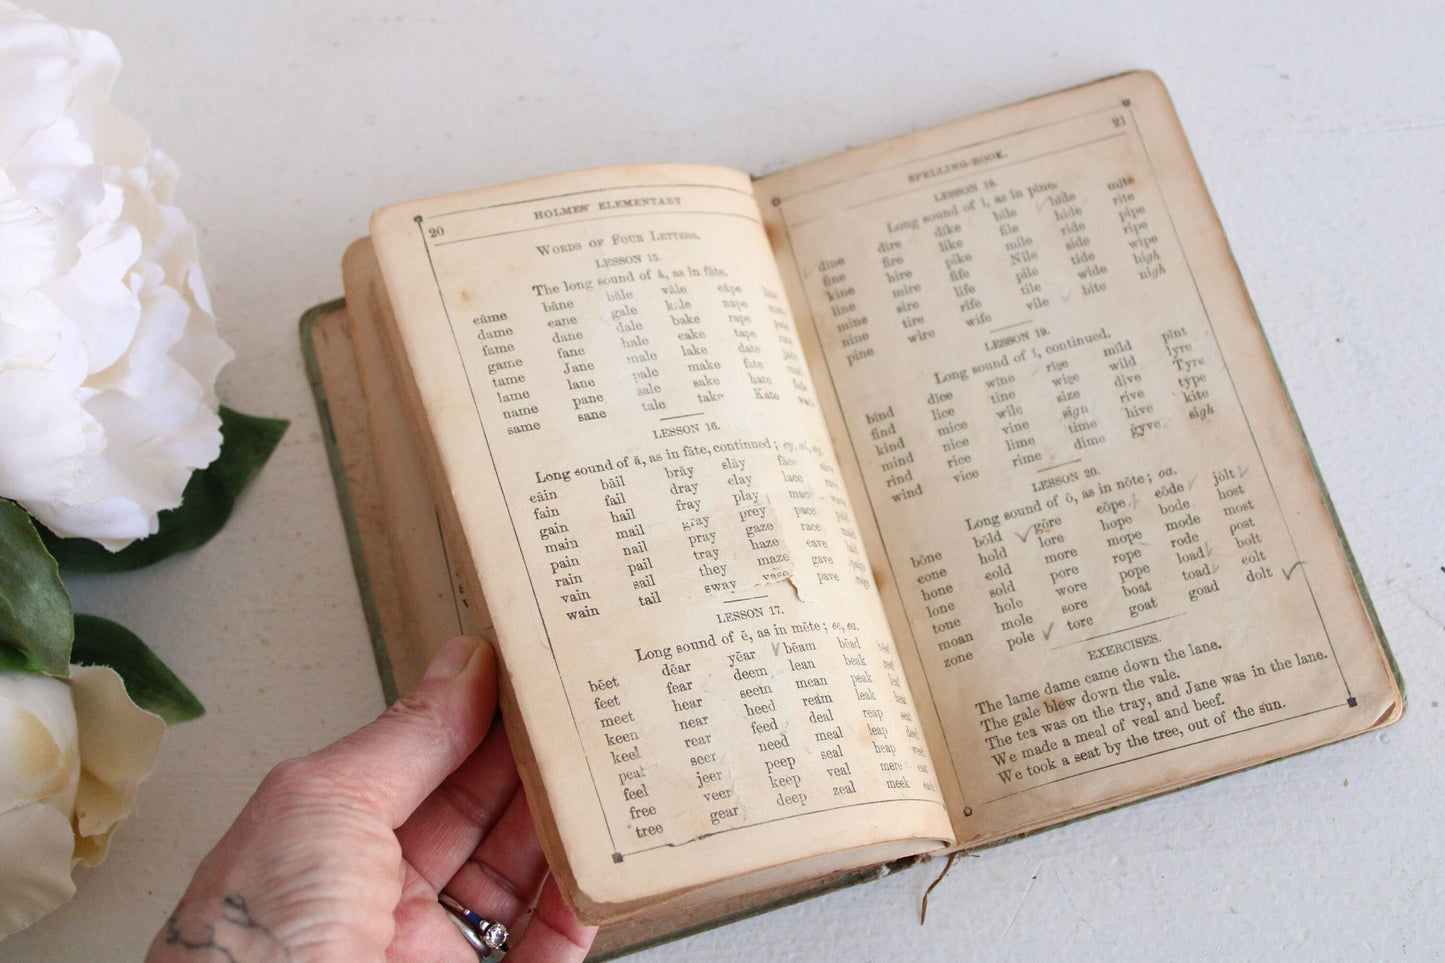 Vintage 1910s Book, "Holmes Elementary Spelling Book For Schools and Families"